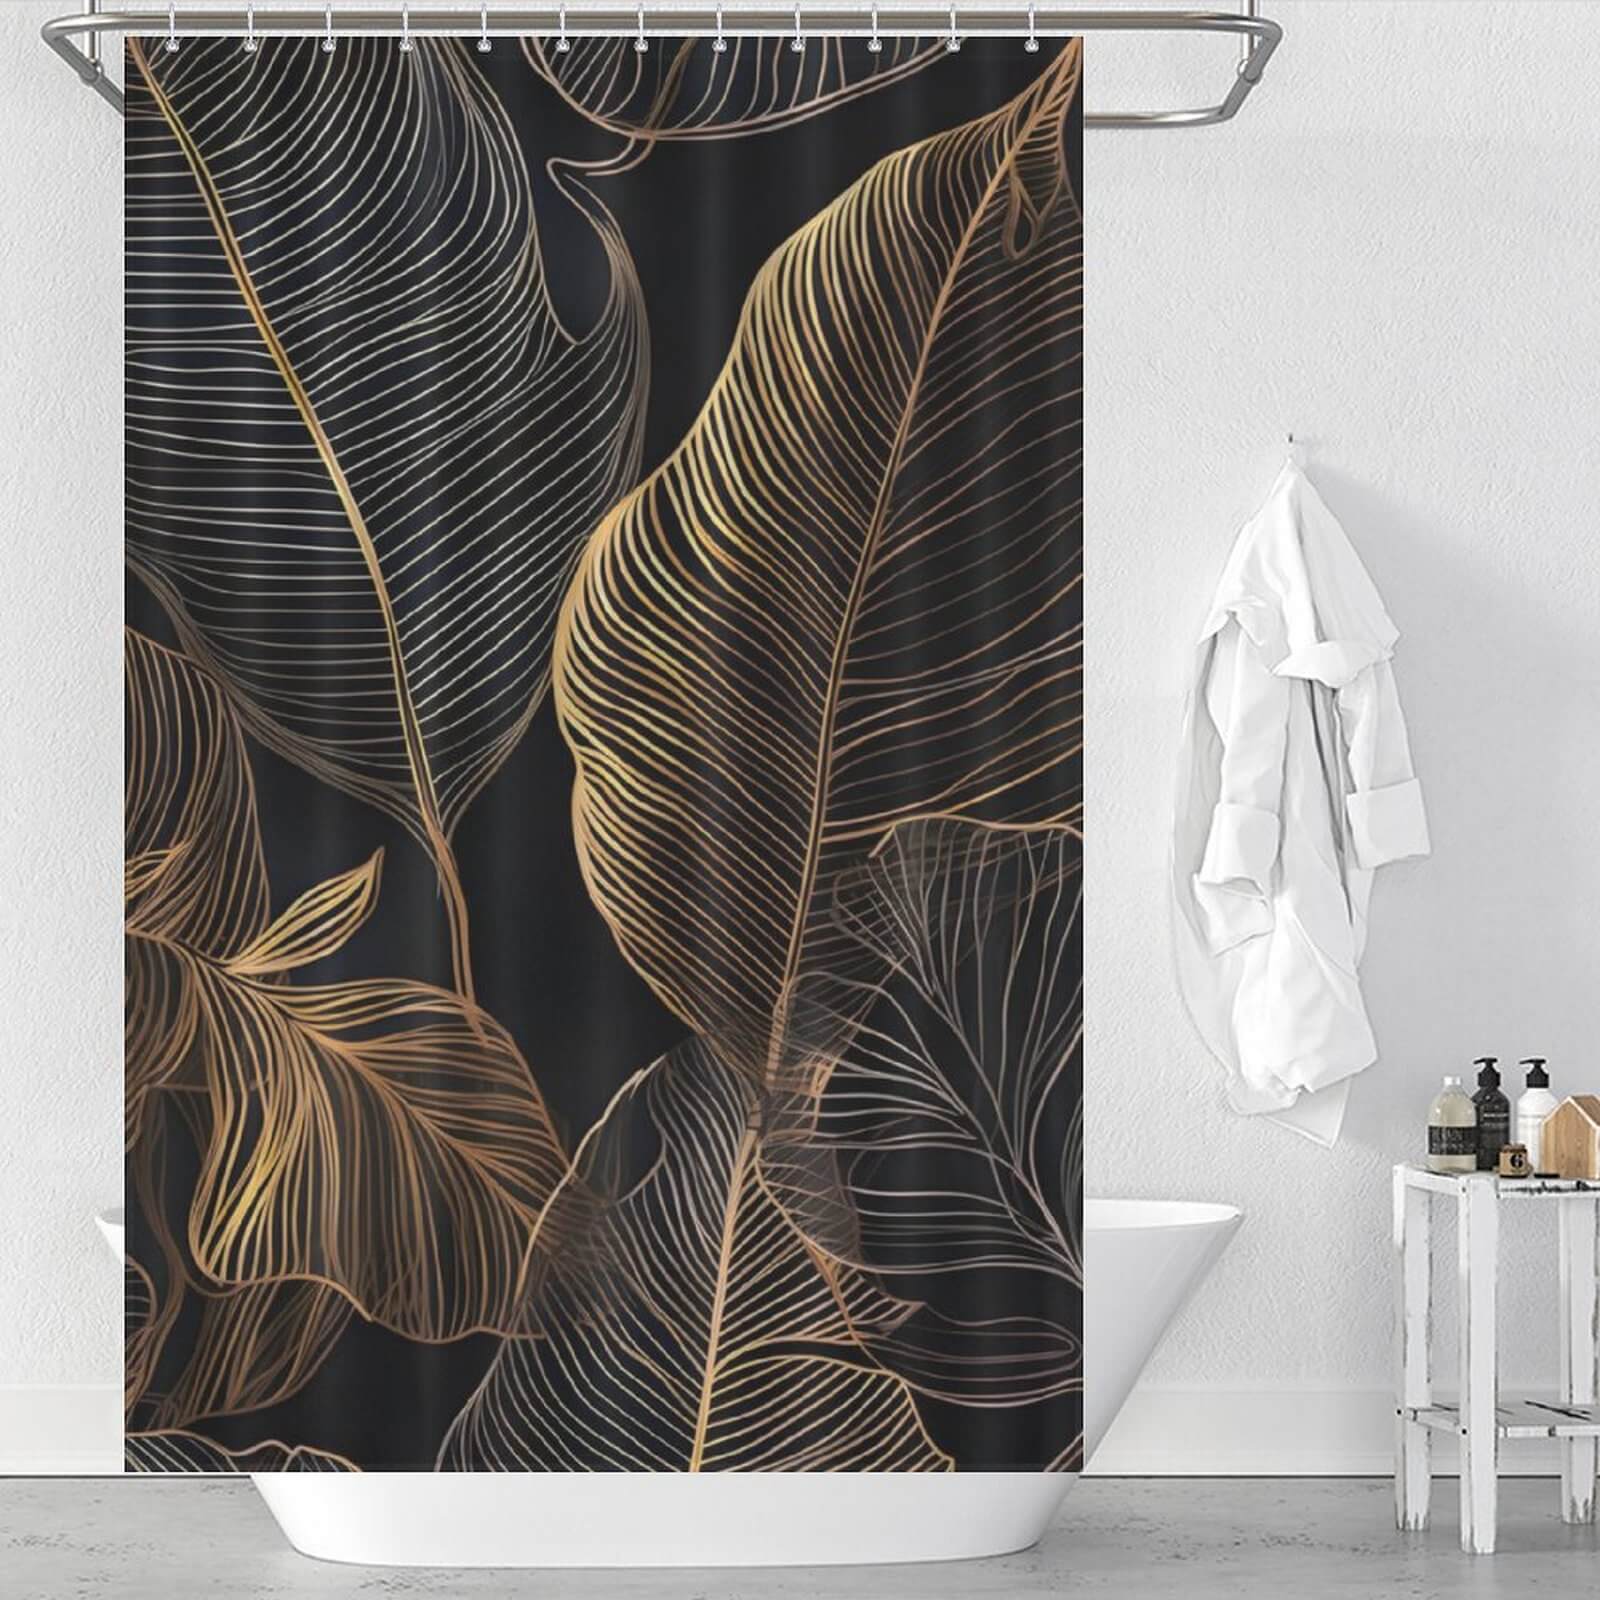 A Golden Tropical Leaves Jungle Shower Curtain from Cotton Cat, perfect for bathroom decor.